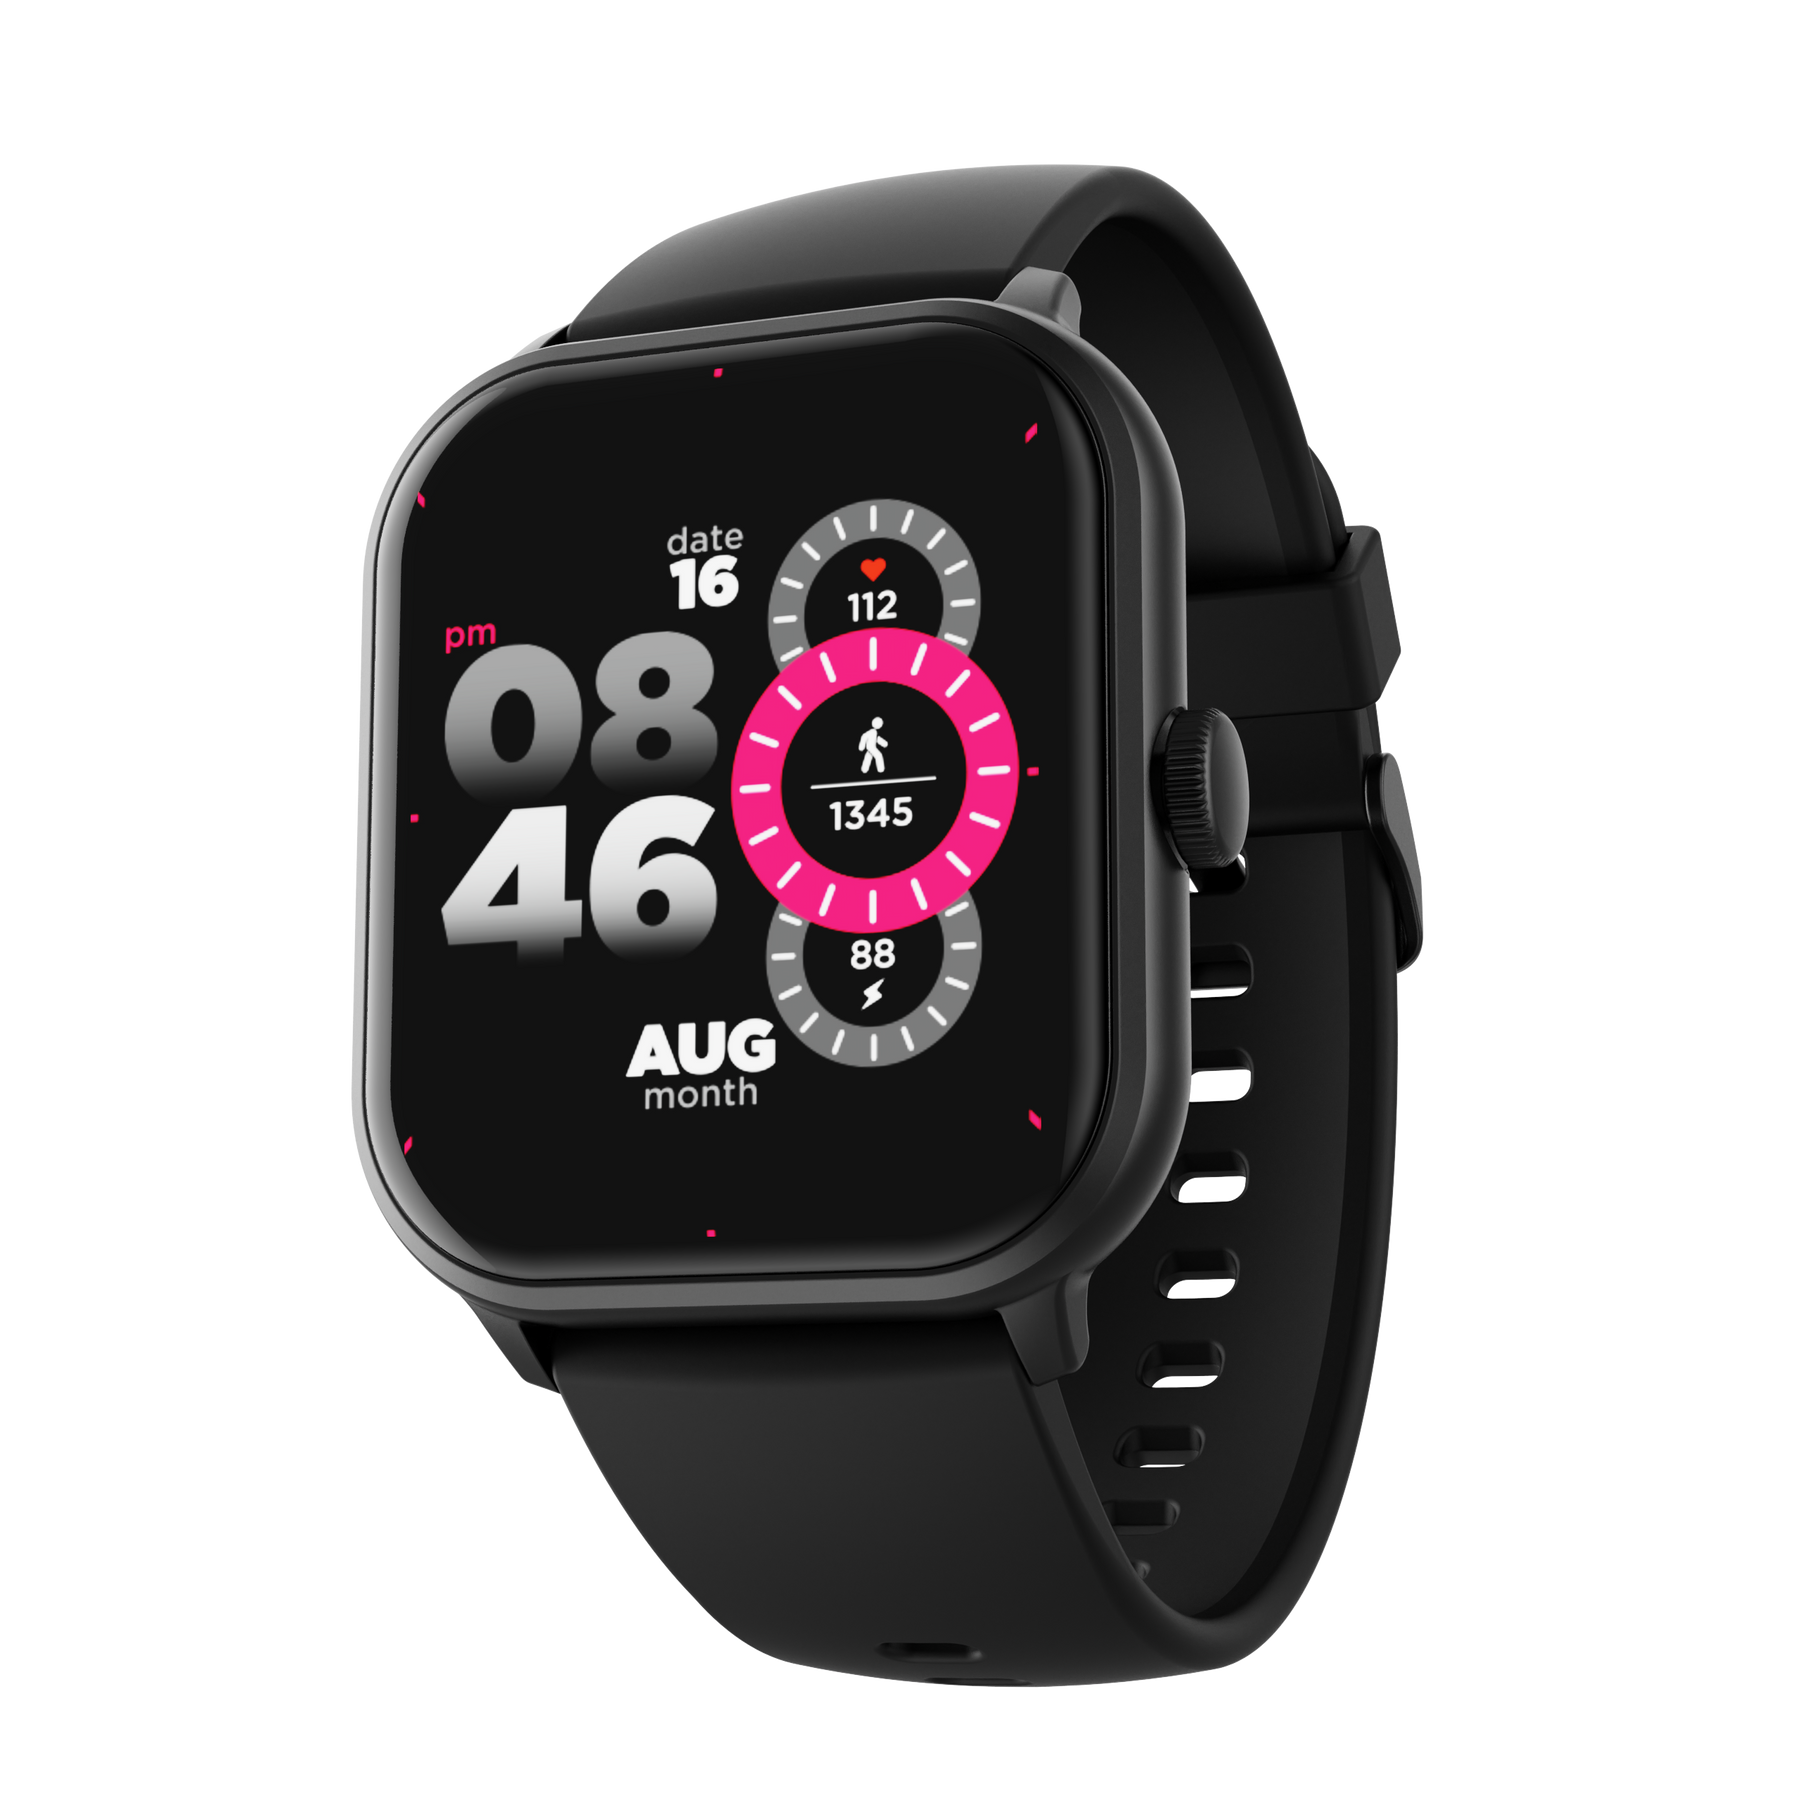 boAt Wave Edge | 1.85"(4.69cm) HD Edge to Edge Display Smartwatch, Bluetooth Calling, 100+ sports modes, IP68 Dust and Water Resistance